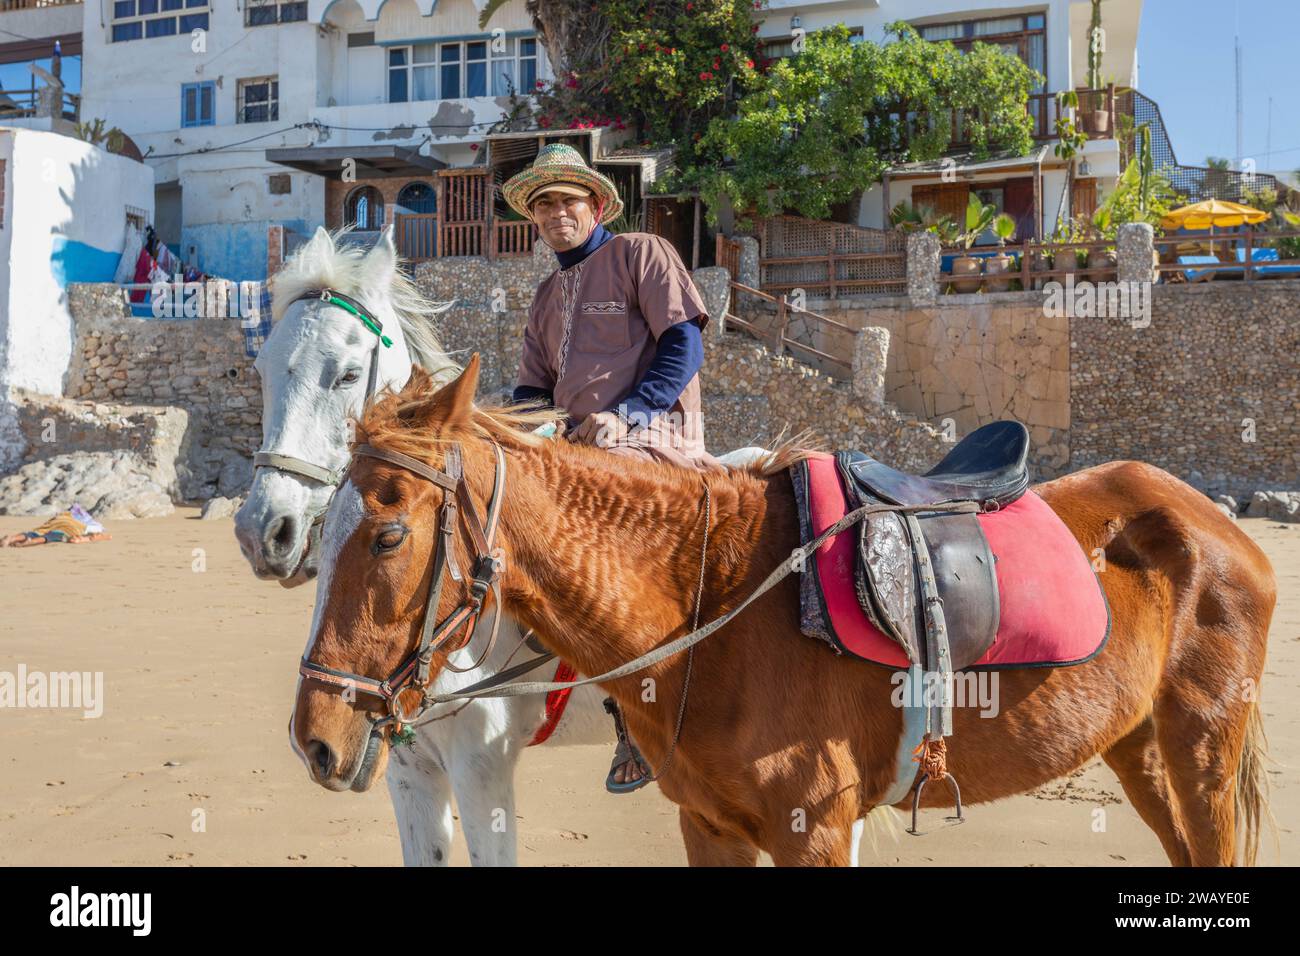 Horses on the sandy beach in the fishing village of Taghazout, Morocco, North Africa. Stock Photo